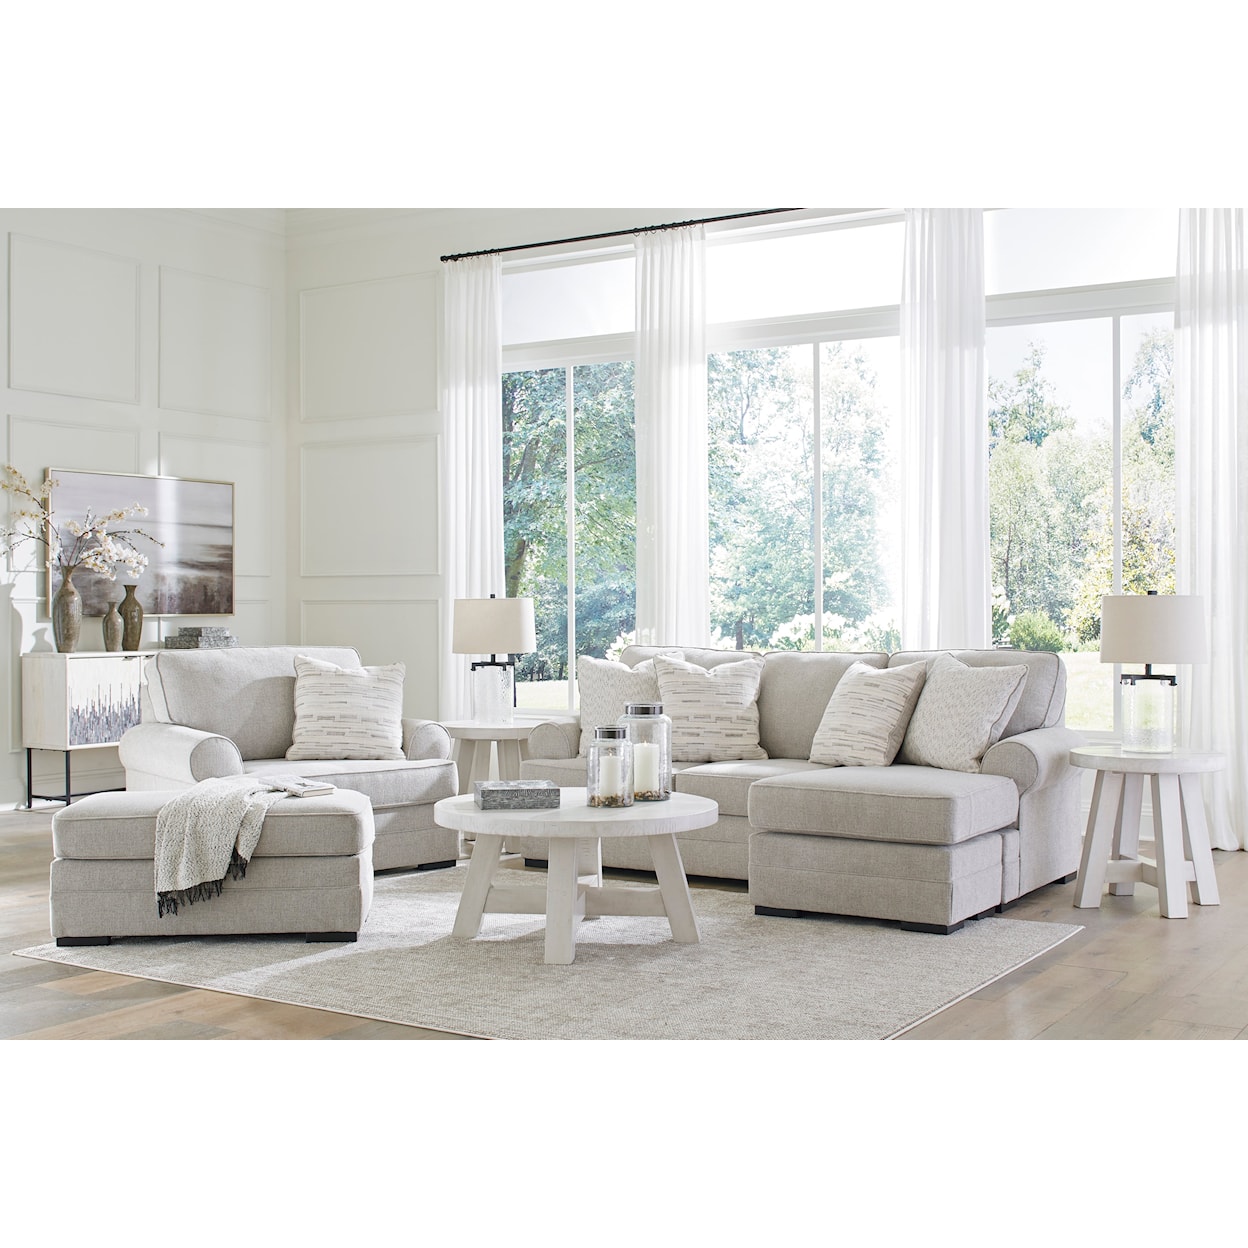 Benchcraft by Ashley Eastonbridge Sofa Chaise, Oversized Chair, and Ottoman